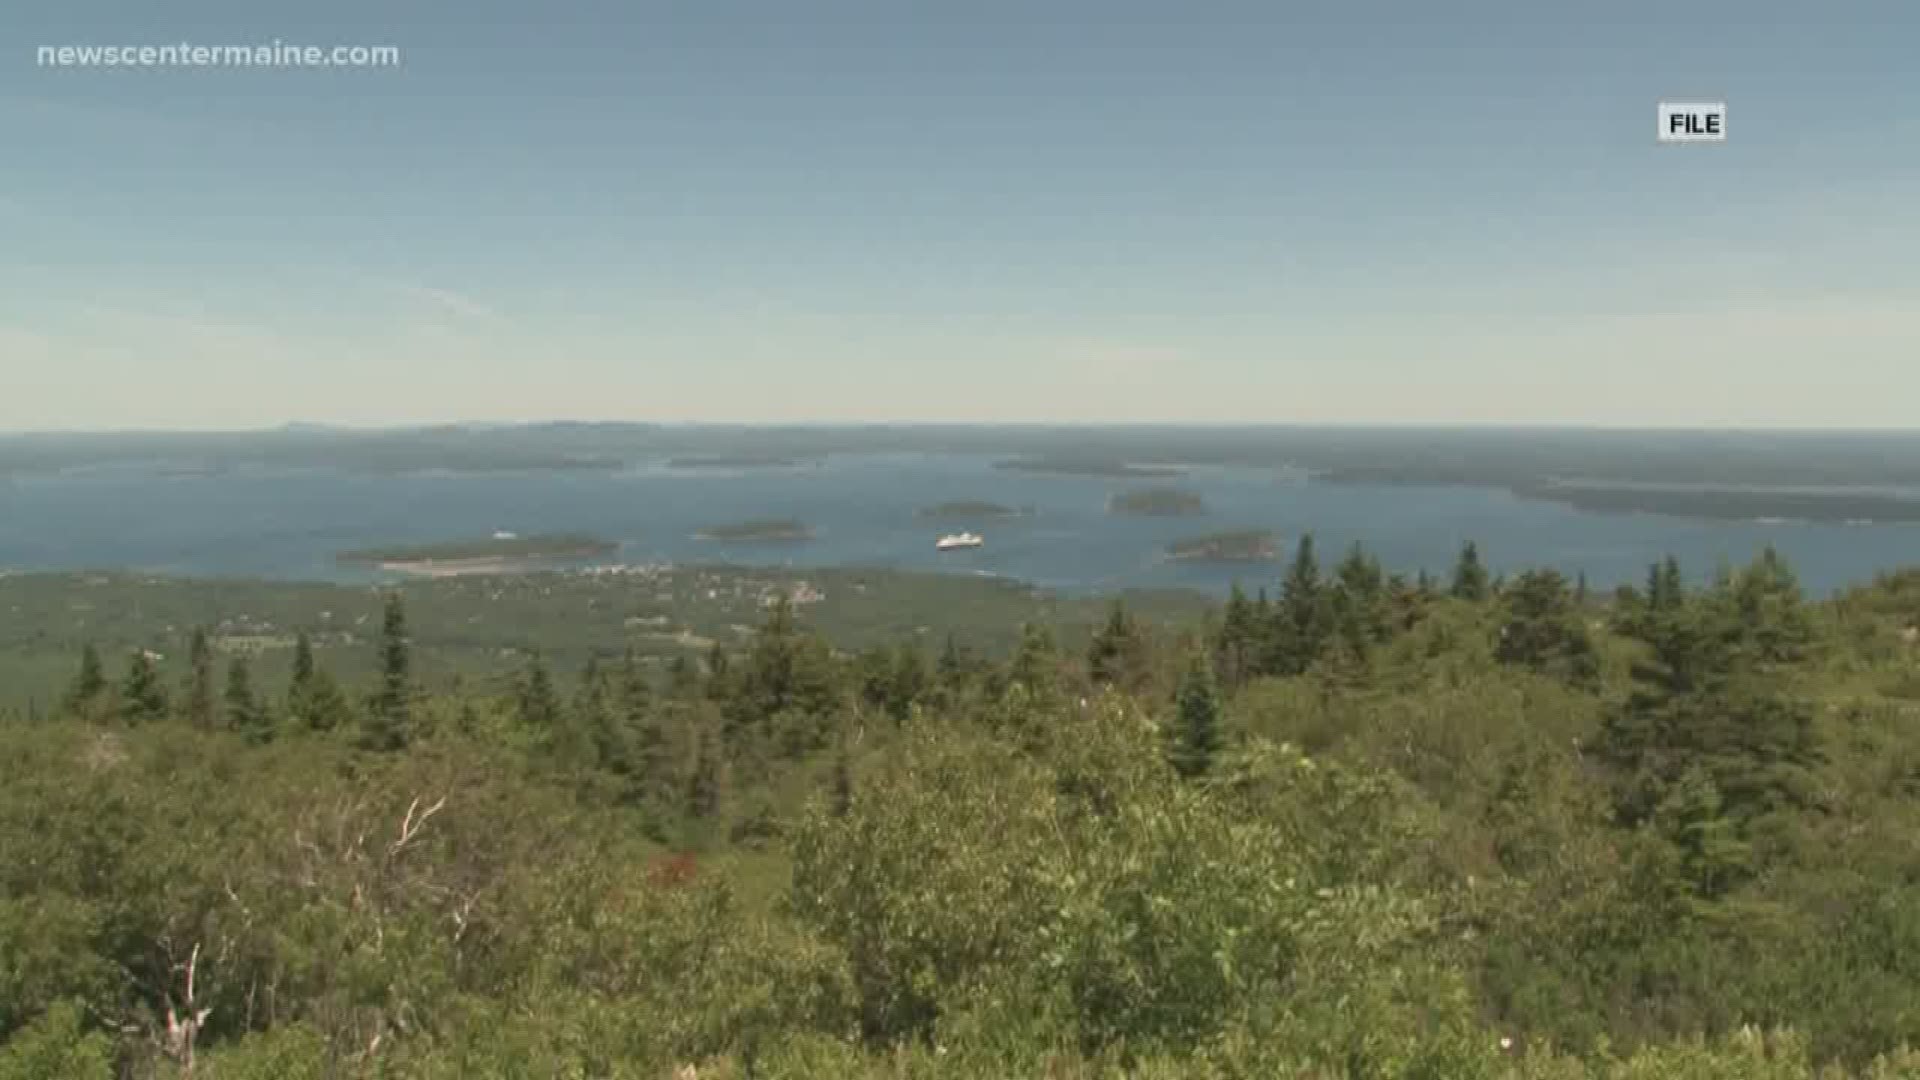 Acadia National Park is now closed due to the coronavirus pandemic.